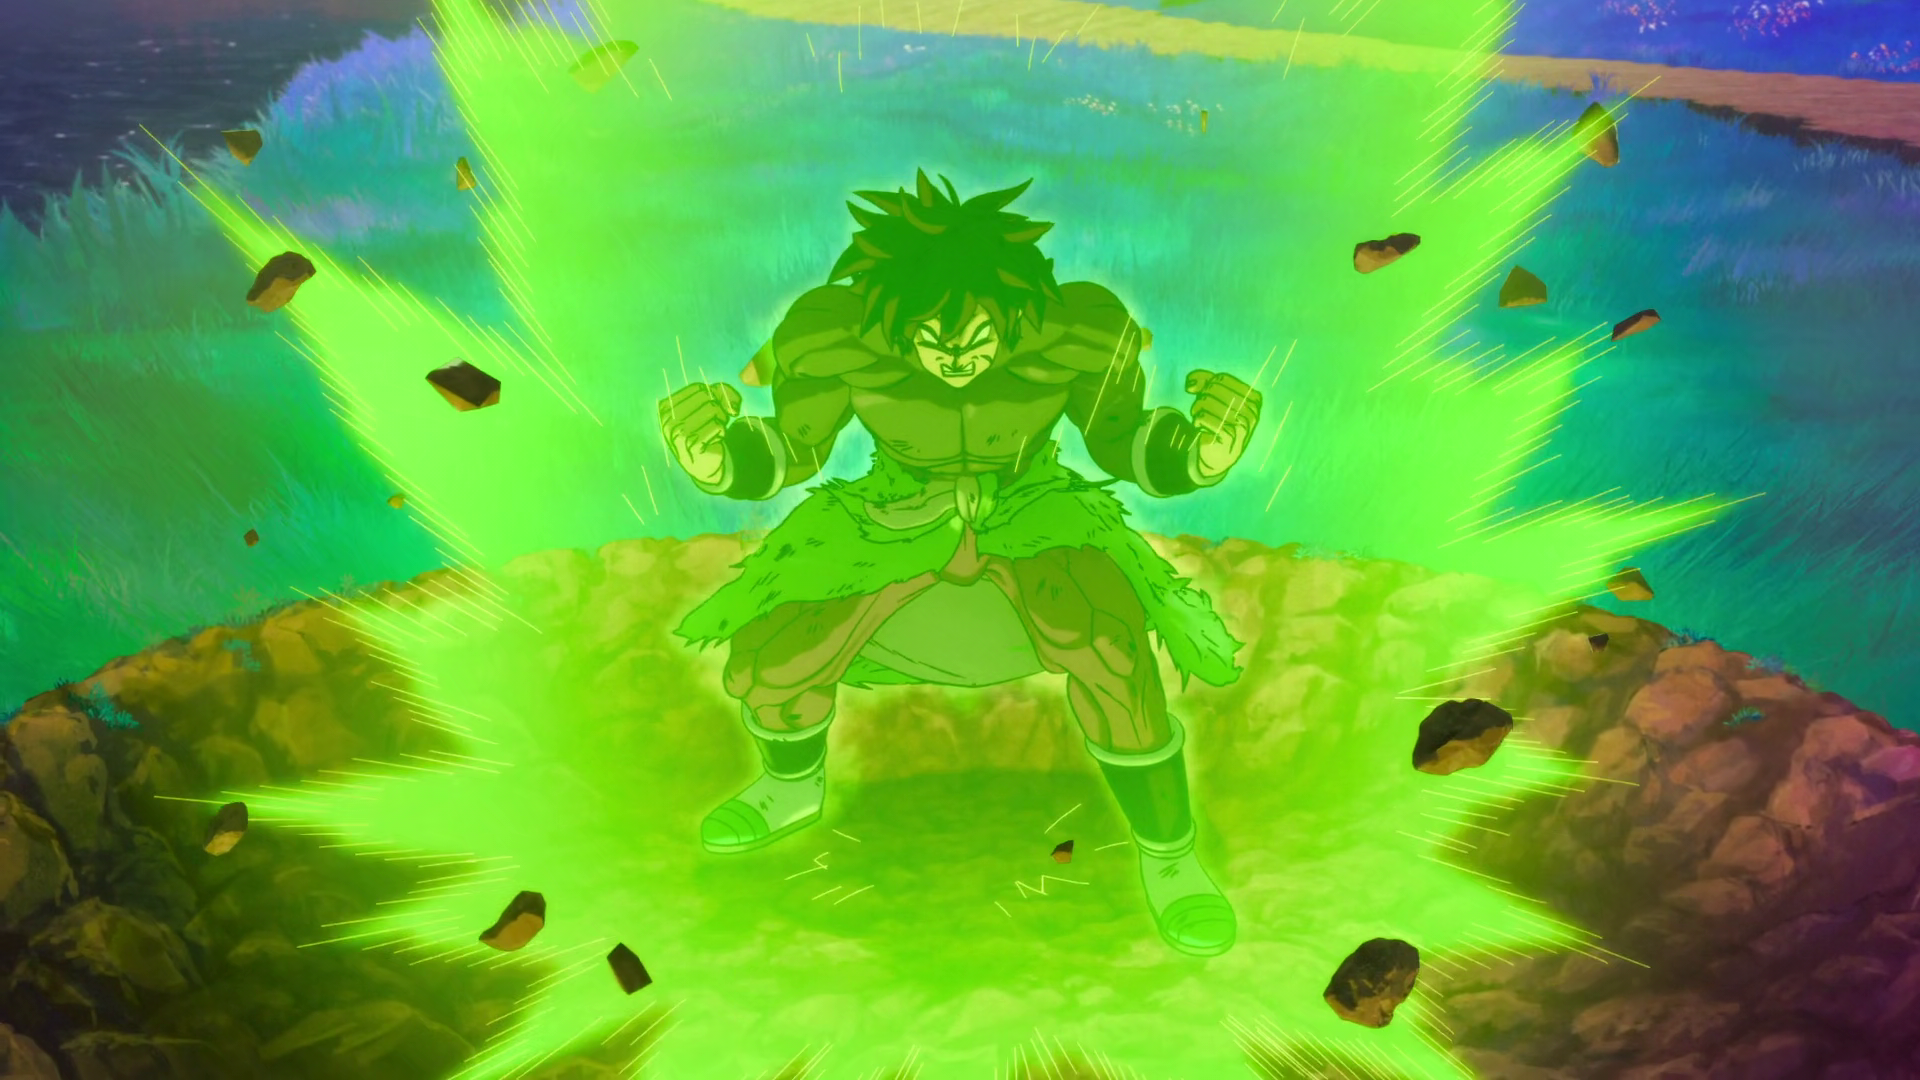 DB Super Hero: Enter Broly! (Broly concept by me) : r/dbz